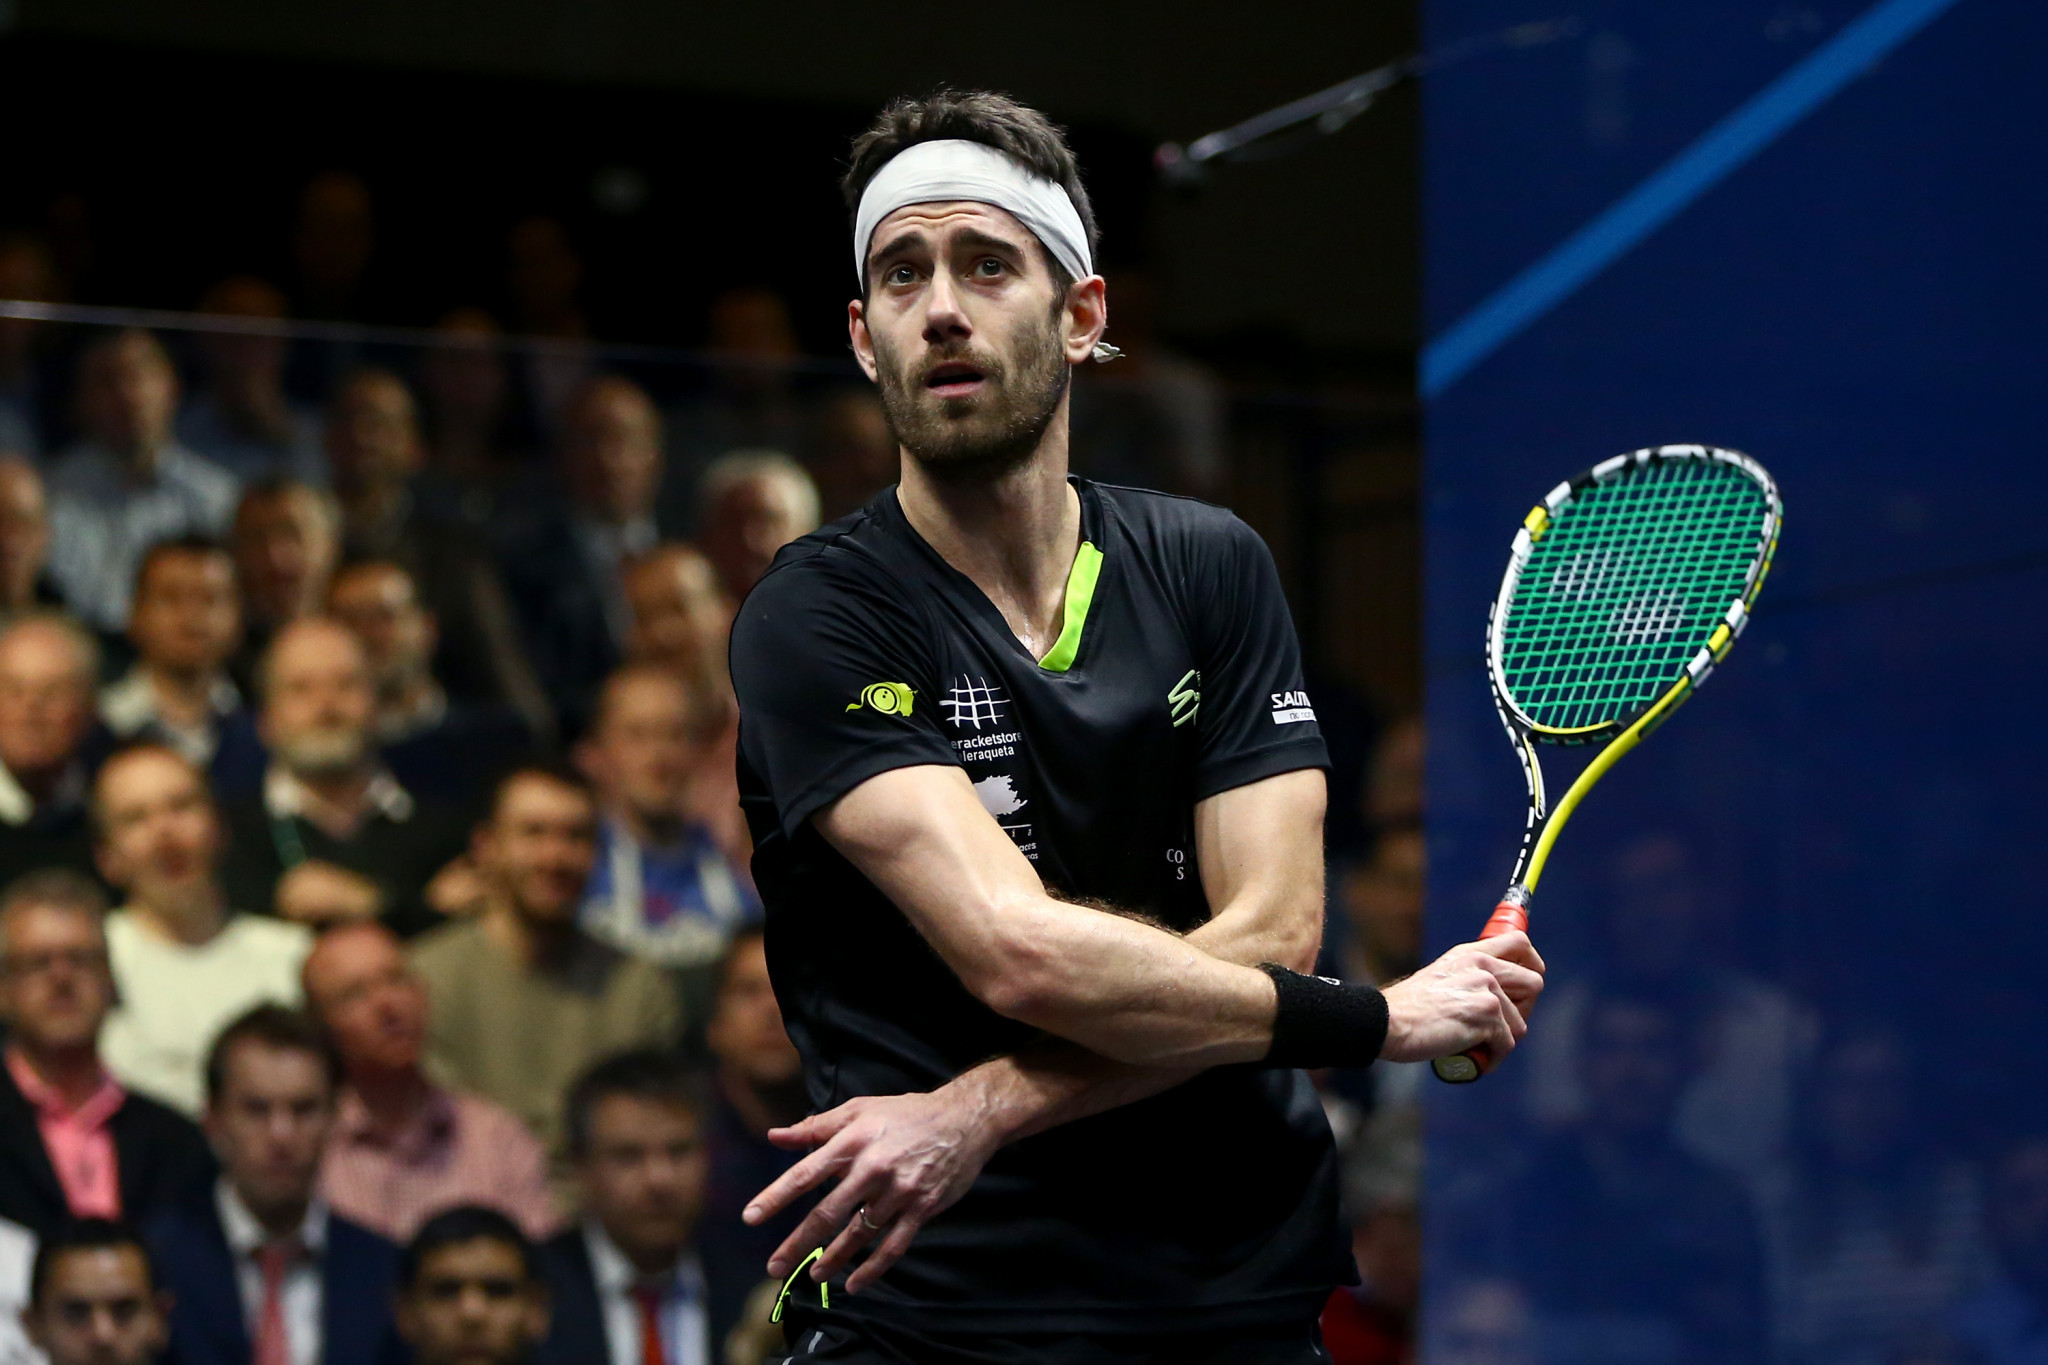 Spain's Borja Golan beat Cameron Pilley in round one and will now play top seed Mohamed Elshorbagy ©Getty Images